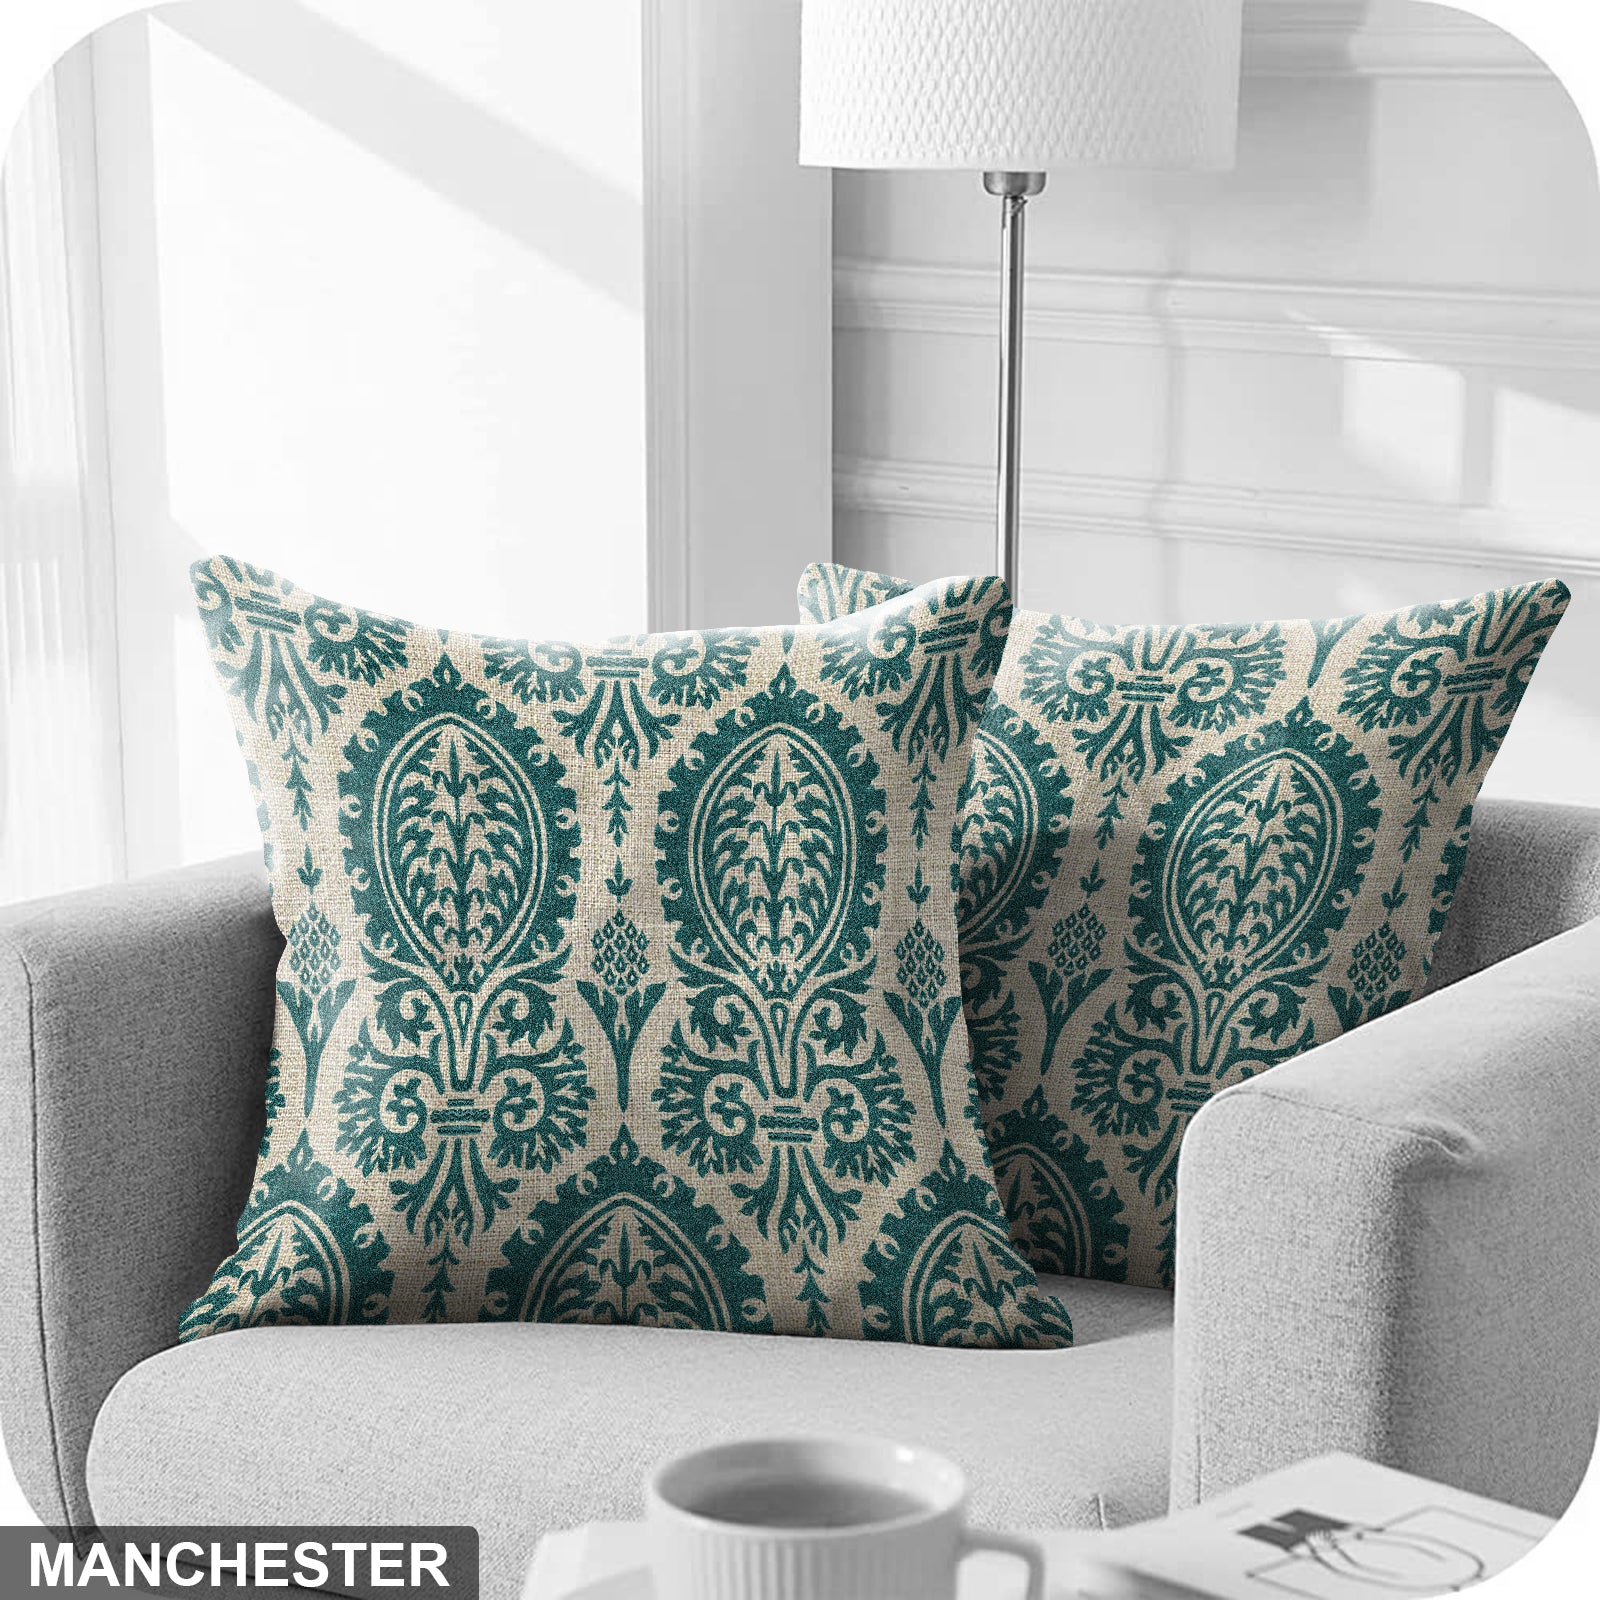 MANCHESTER TEAL (16X16 INCH) DIGITAL PRINTED CUSHION COVER